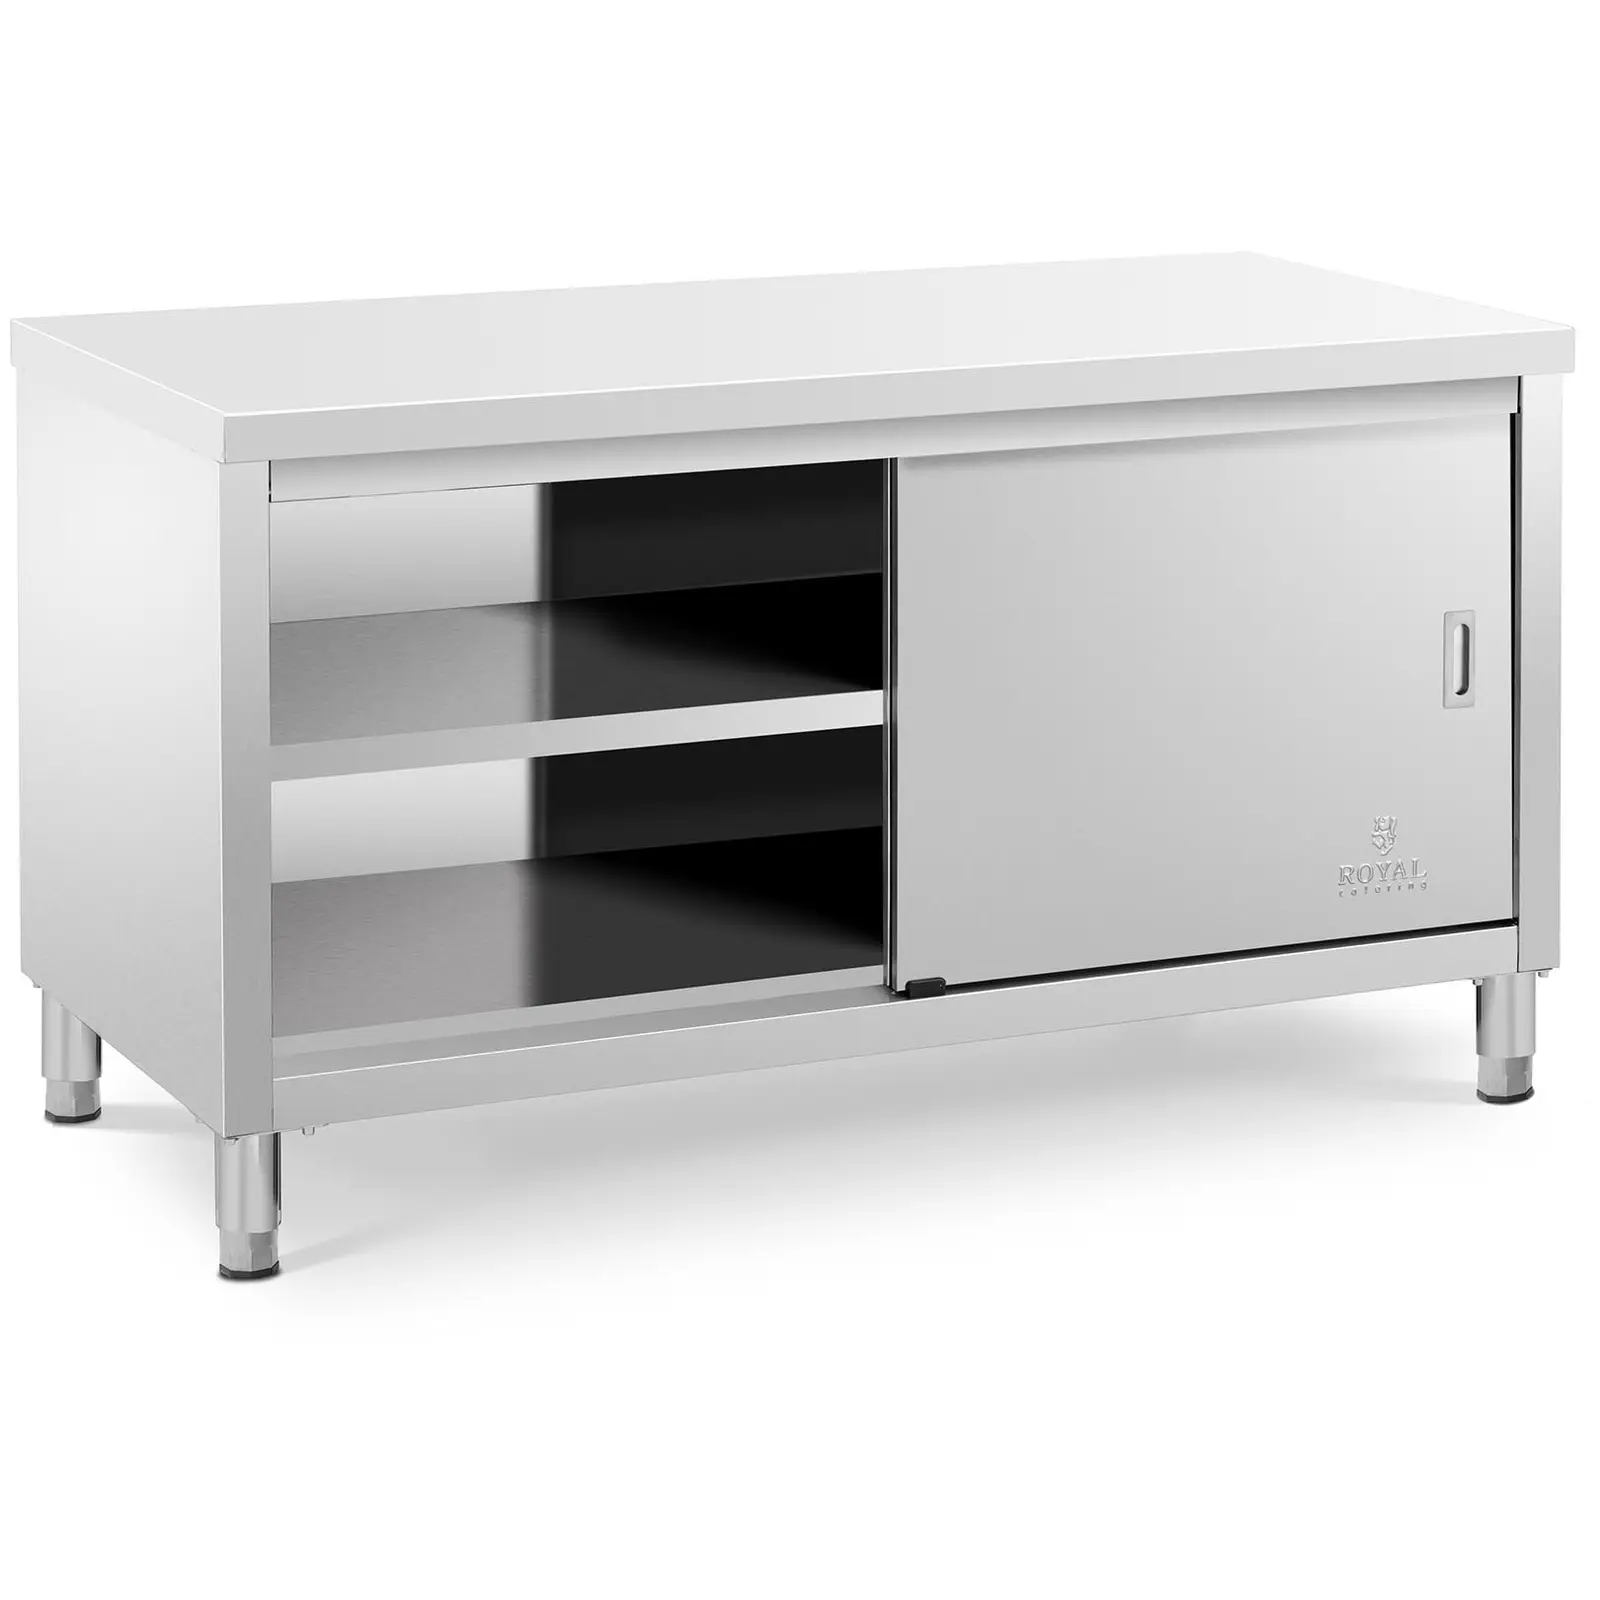 Title Stainless steel work cabinet - 150 x 70 x 85 cm - 600 kg Load capacity